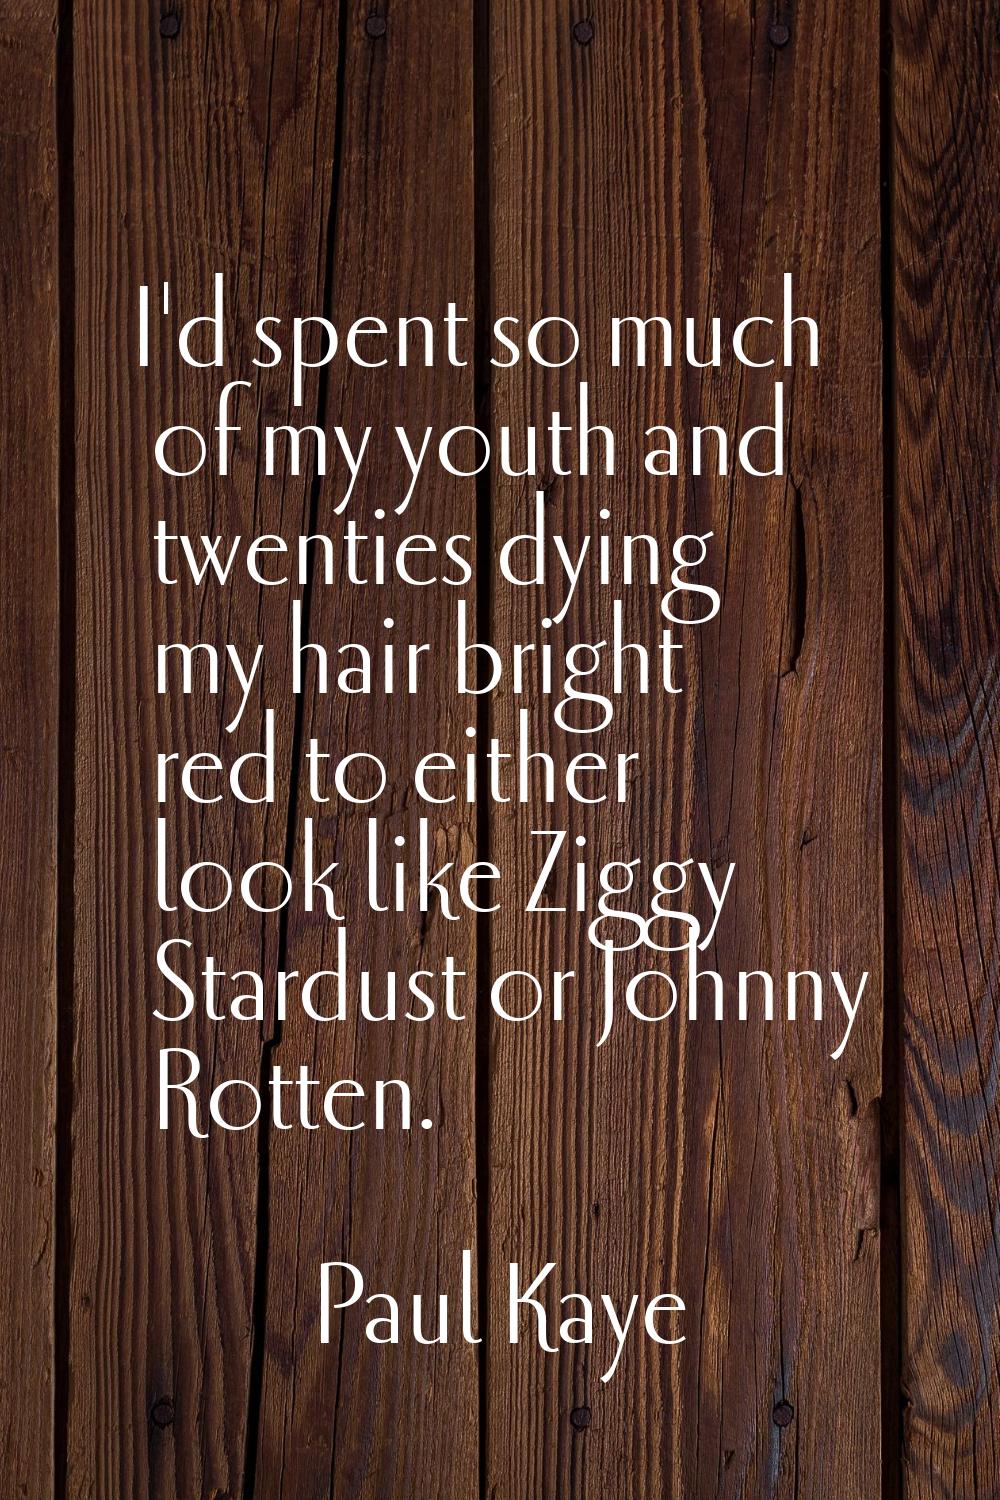 I'd spent so much of my youth and twenties dying my hair bright red to either look like Ziggy Stard